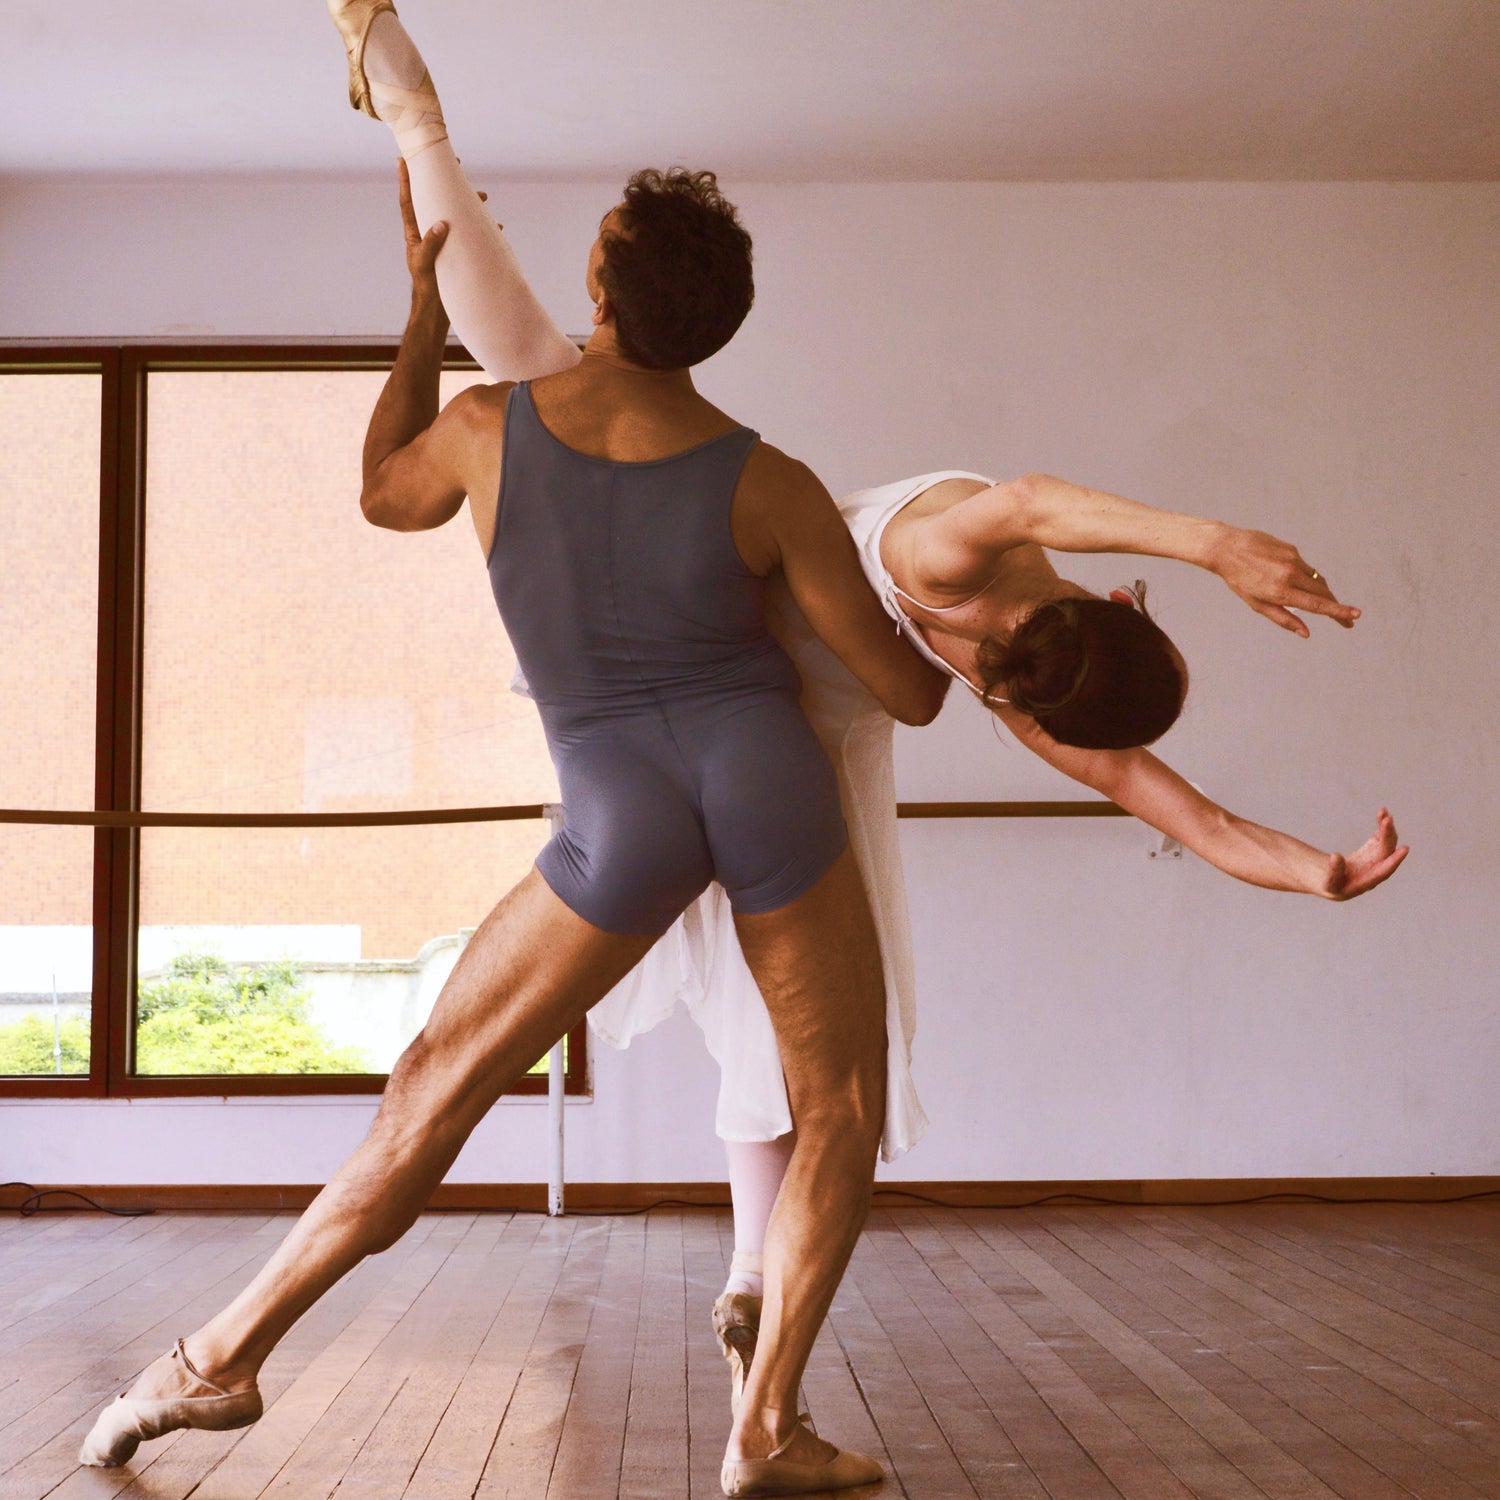 Can Men Wear Leotards And Tights To Ballet?